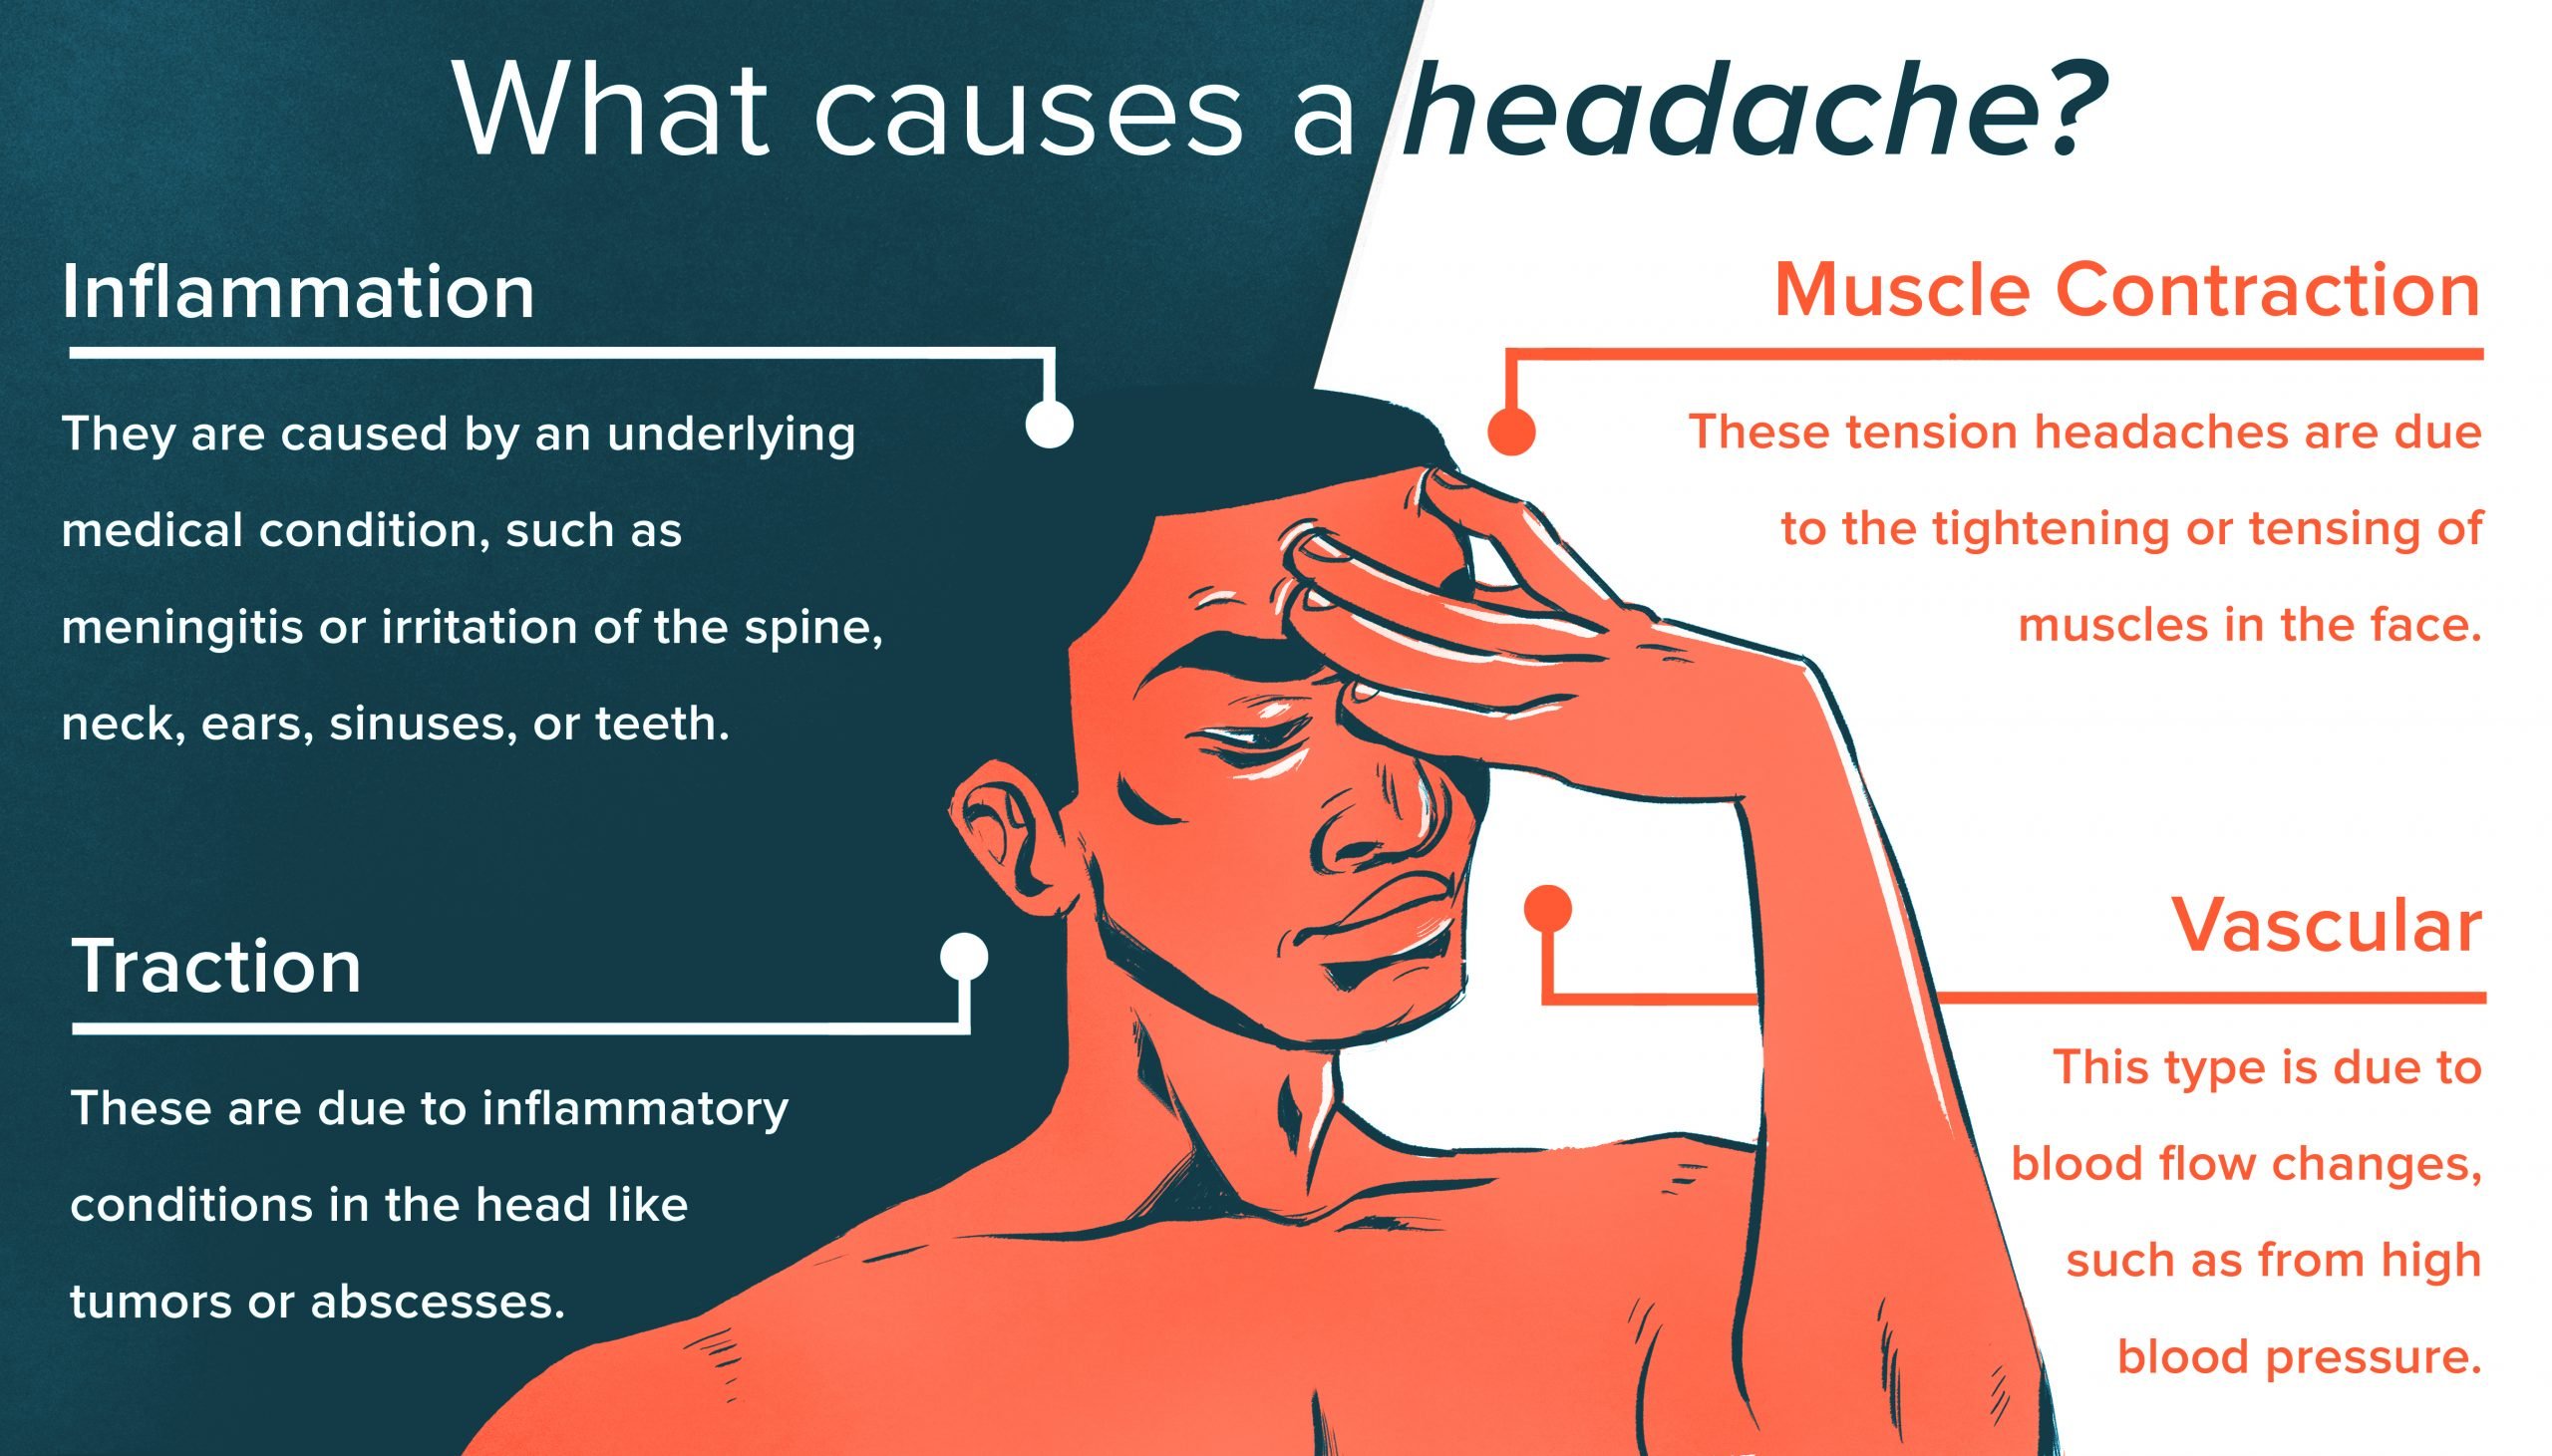 Try These 9 Simple Headache Hacks for Fast Relief